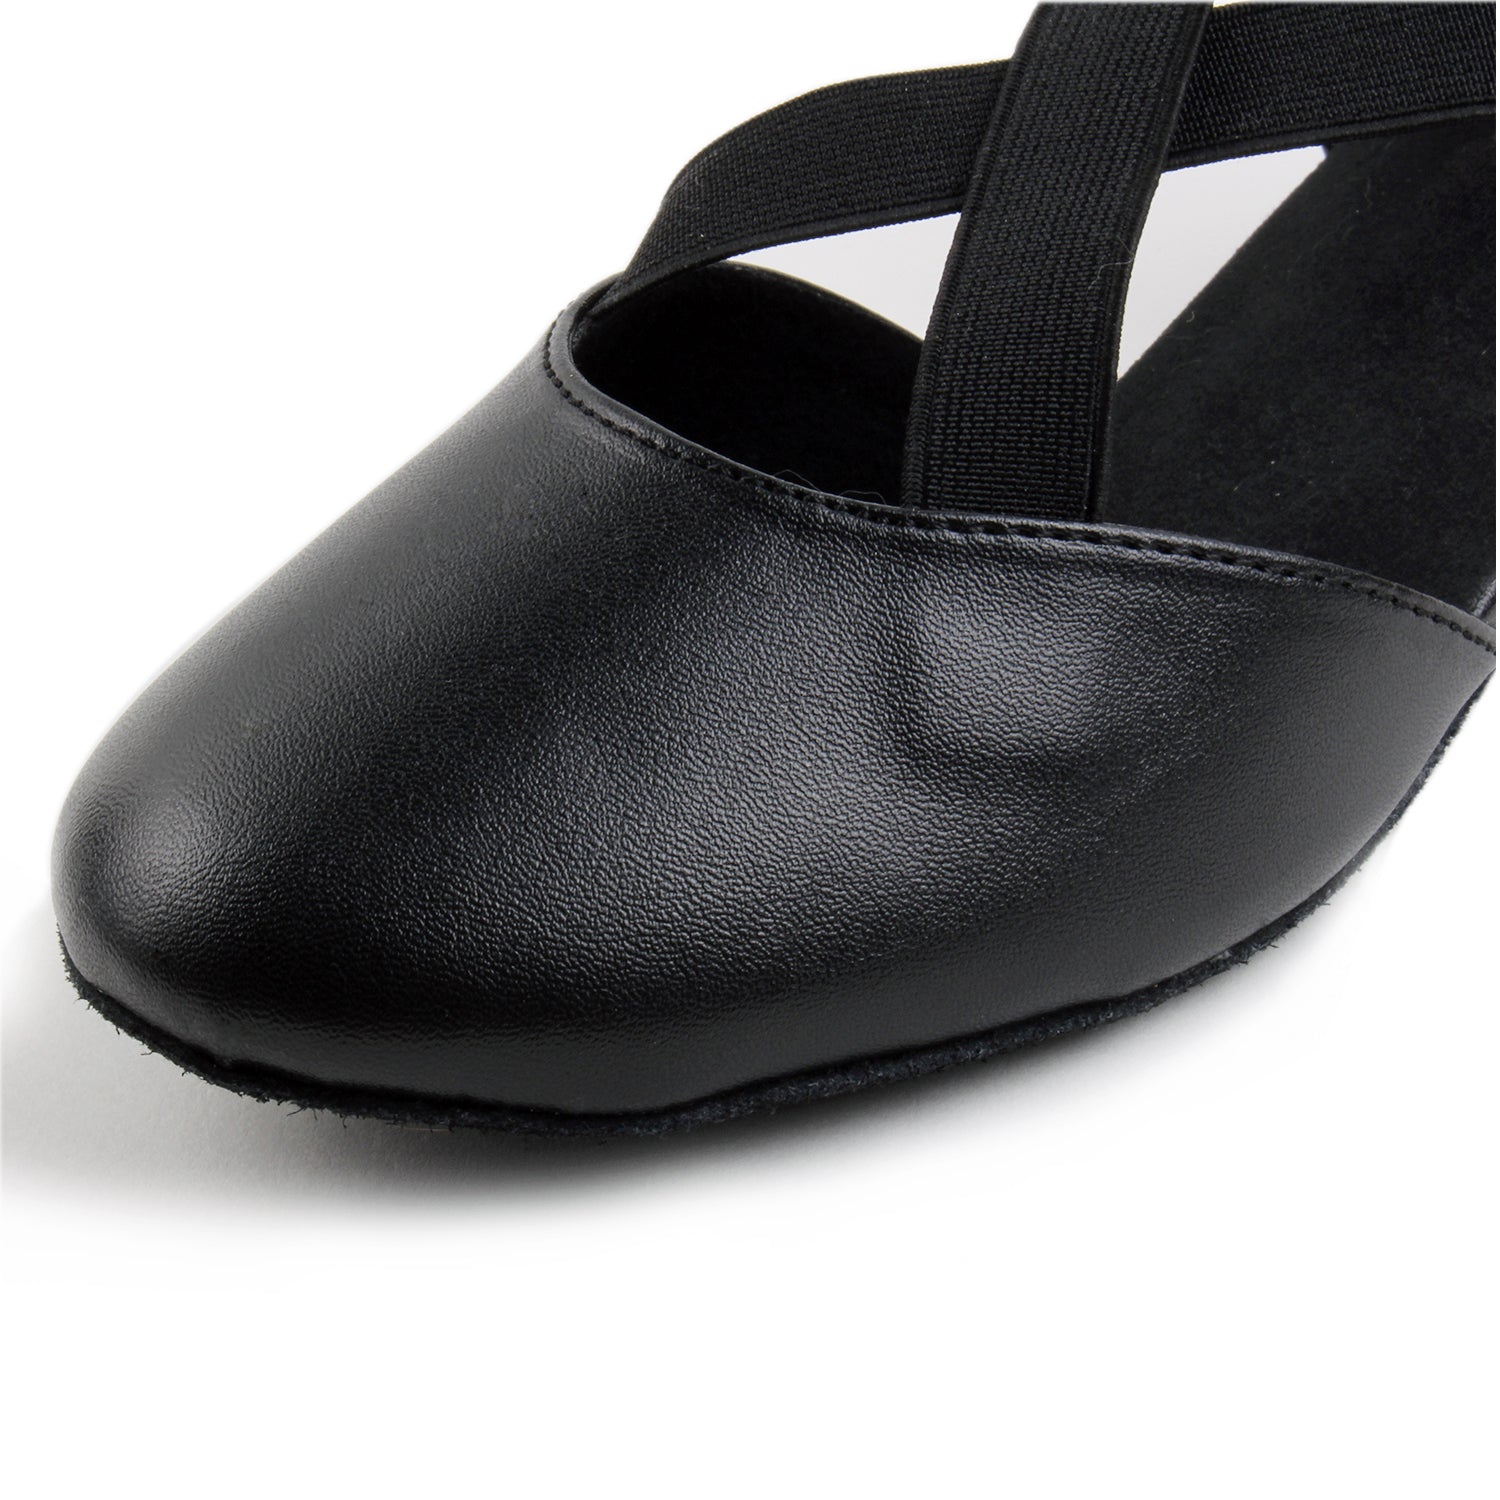 Ladies black suede sole ballroom dancing shoes for tango and latin practice with closed-toe design (PD7307A)1